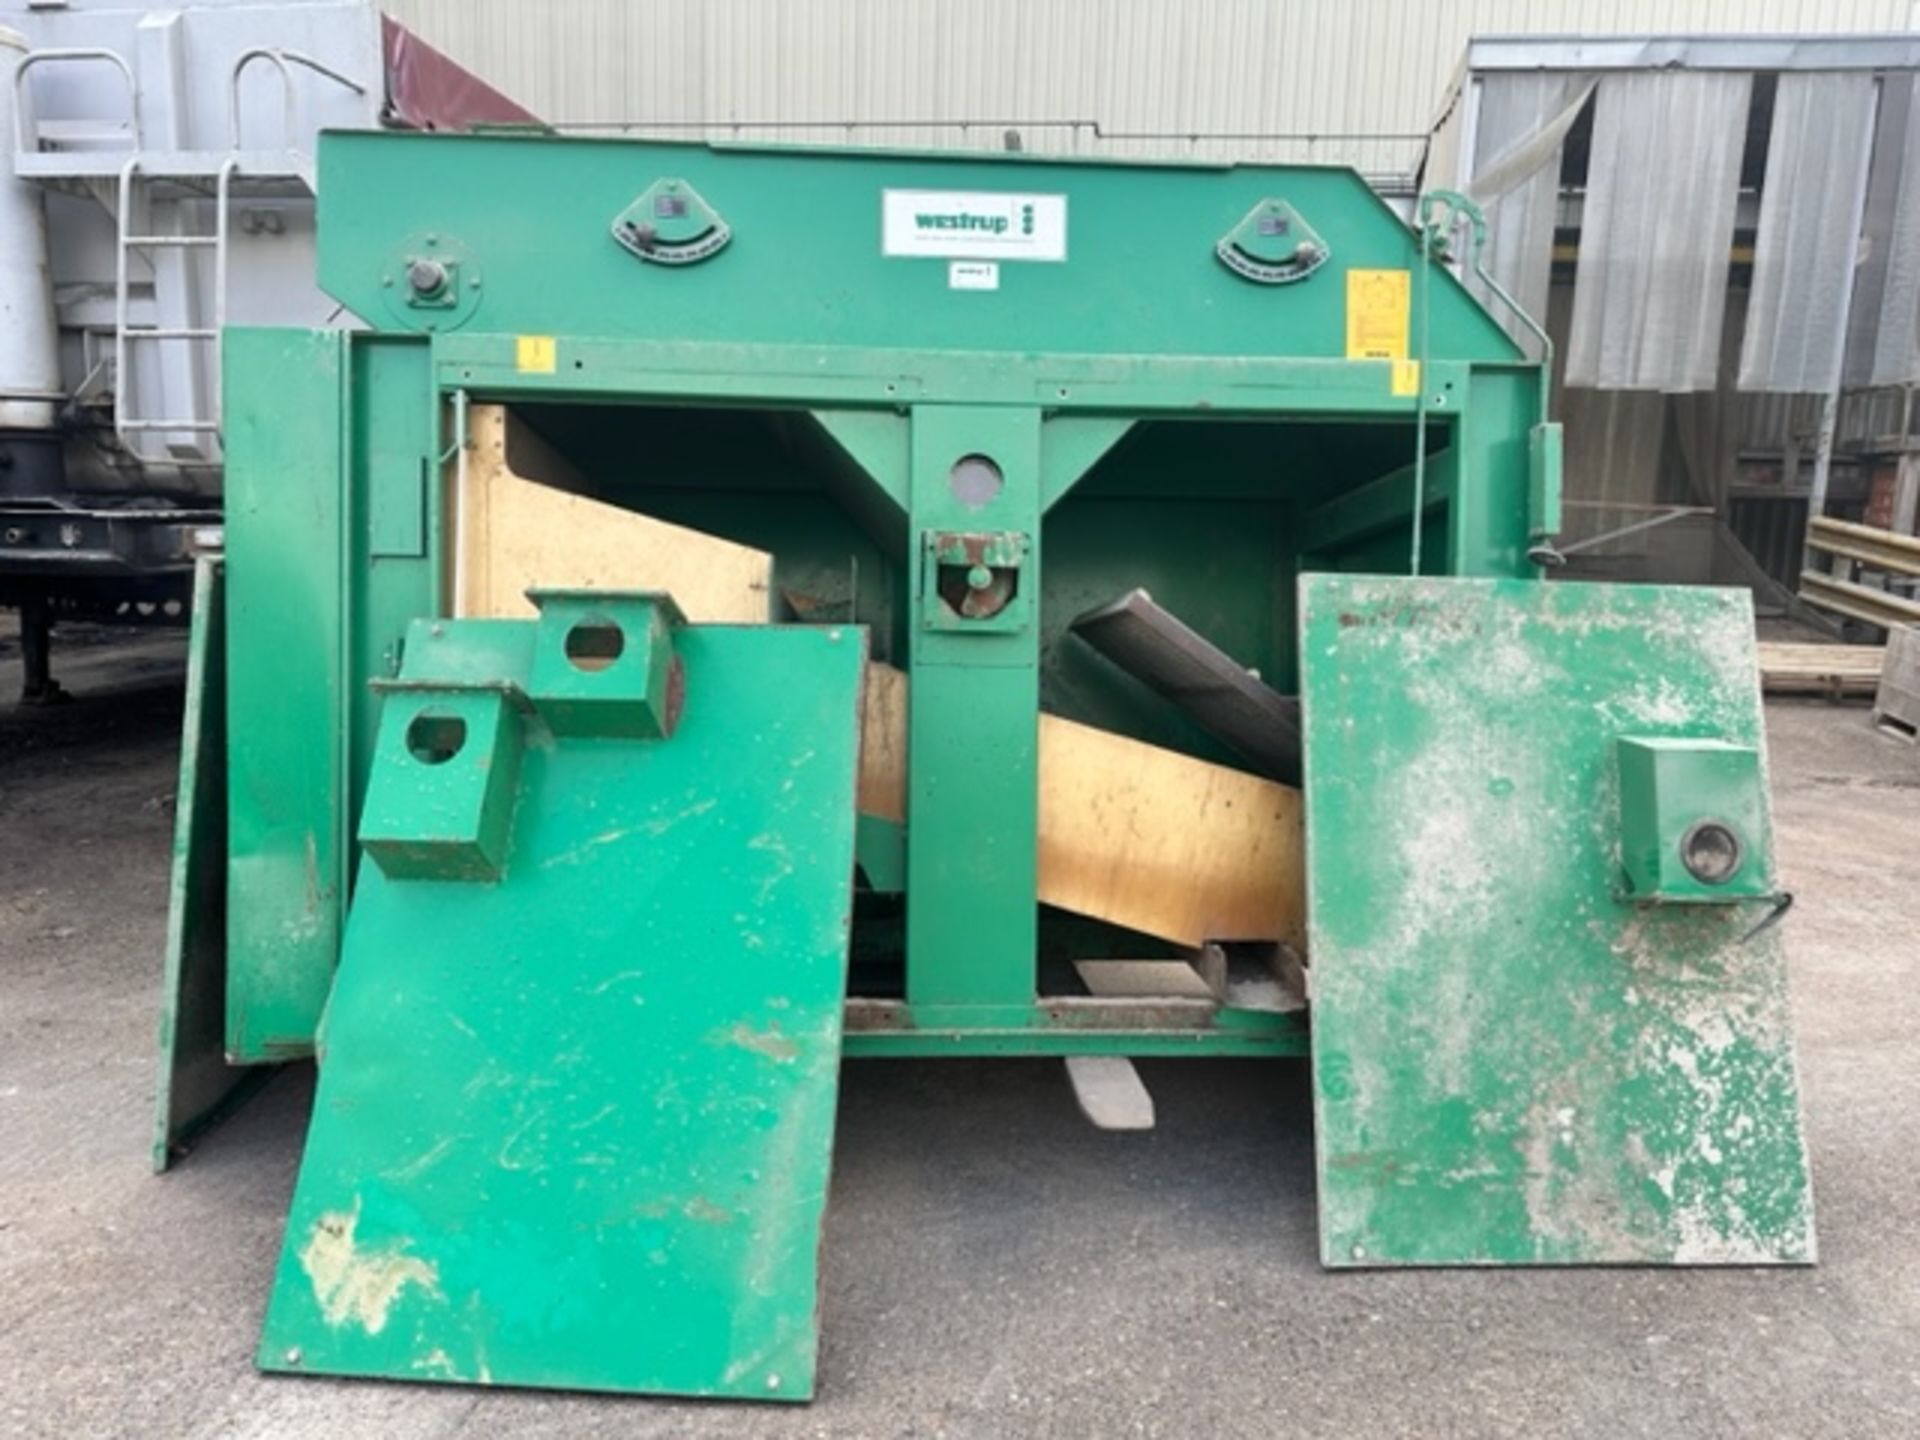 Westrup SAB-1000 Pre Cleaner Machine (no aspiration fan). Loading free of charge - yes. Lot location - Image 11 of 15